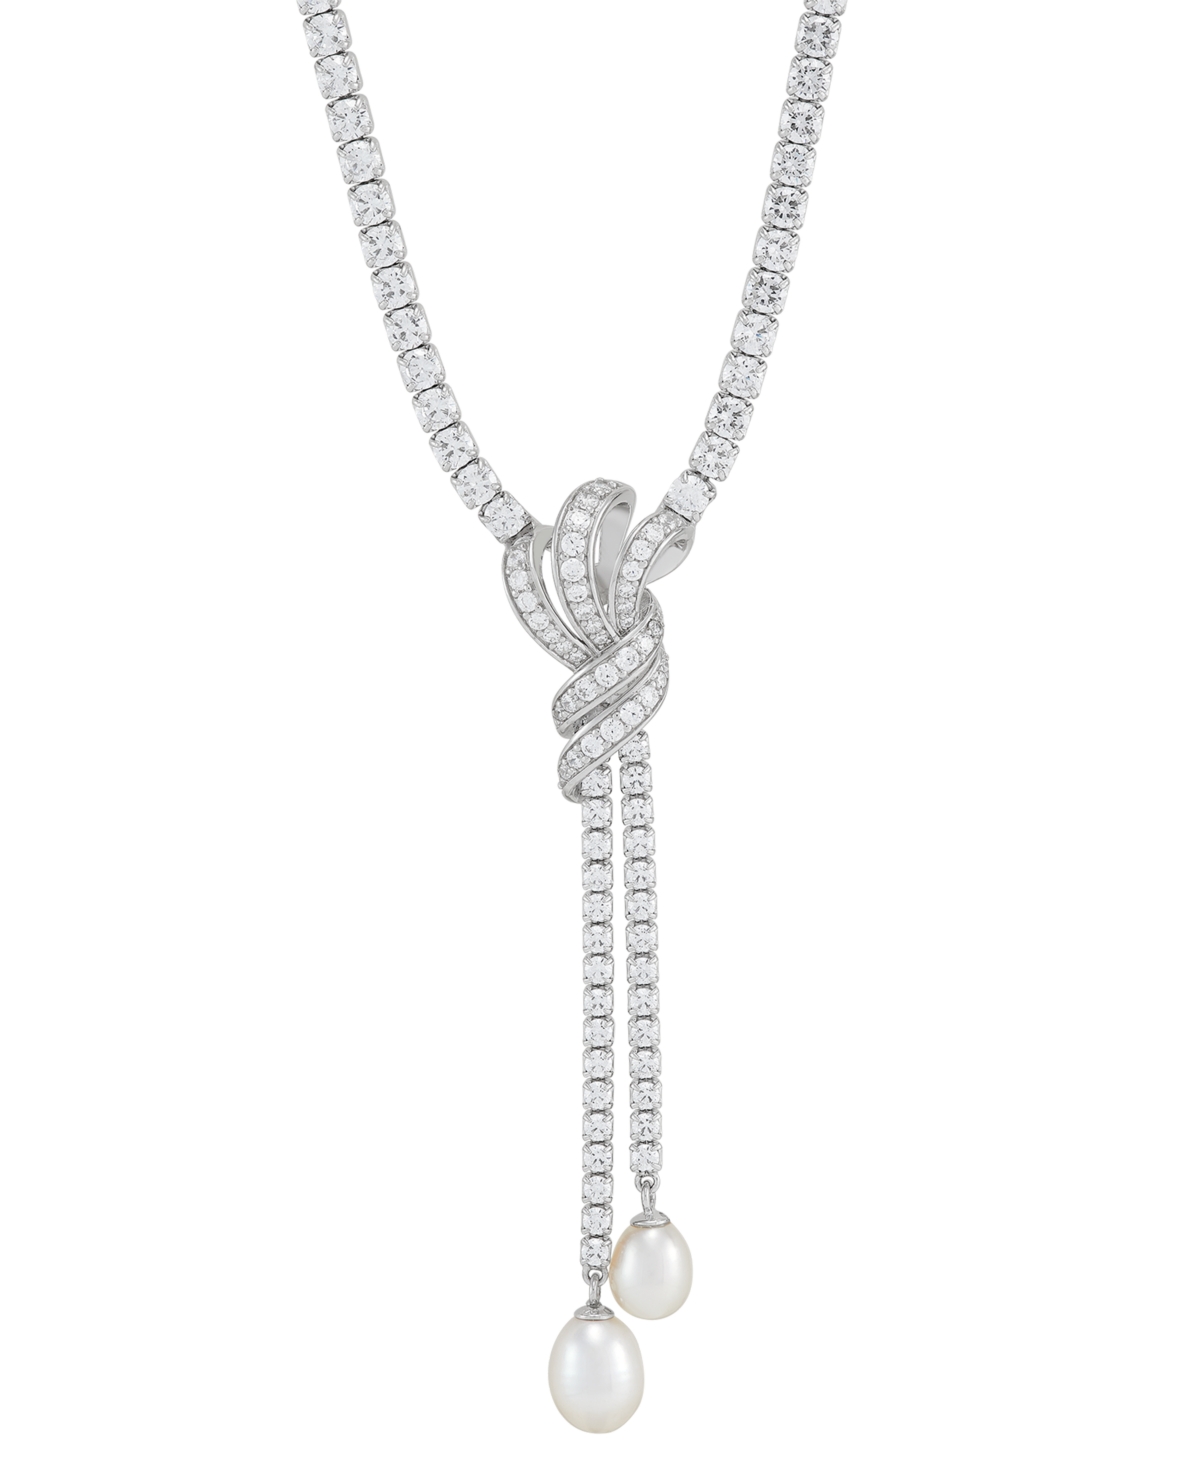 Freshwater Pearl (9x7mm & 8x6mm) Cubic Zirconia Knotted 17" Lariat Necklace in Sterling Silver - Sterling Silver